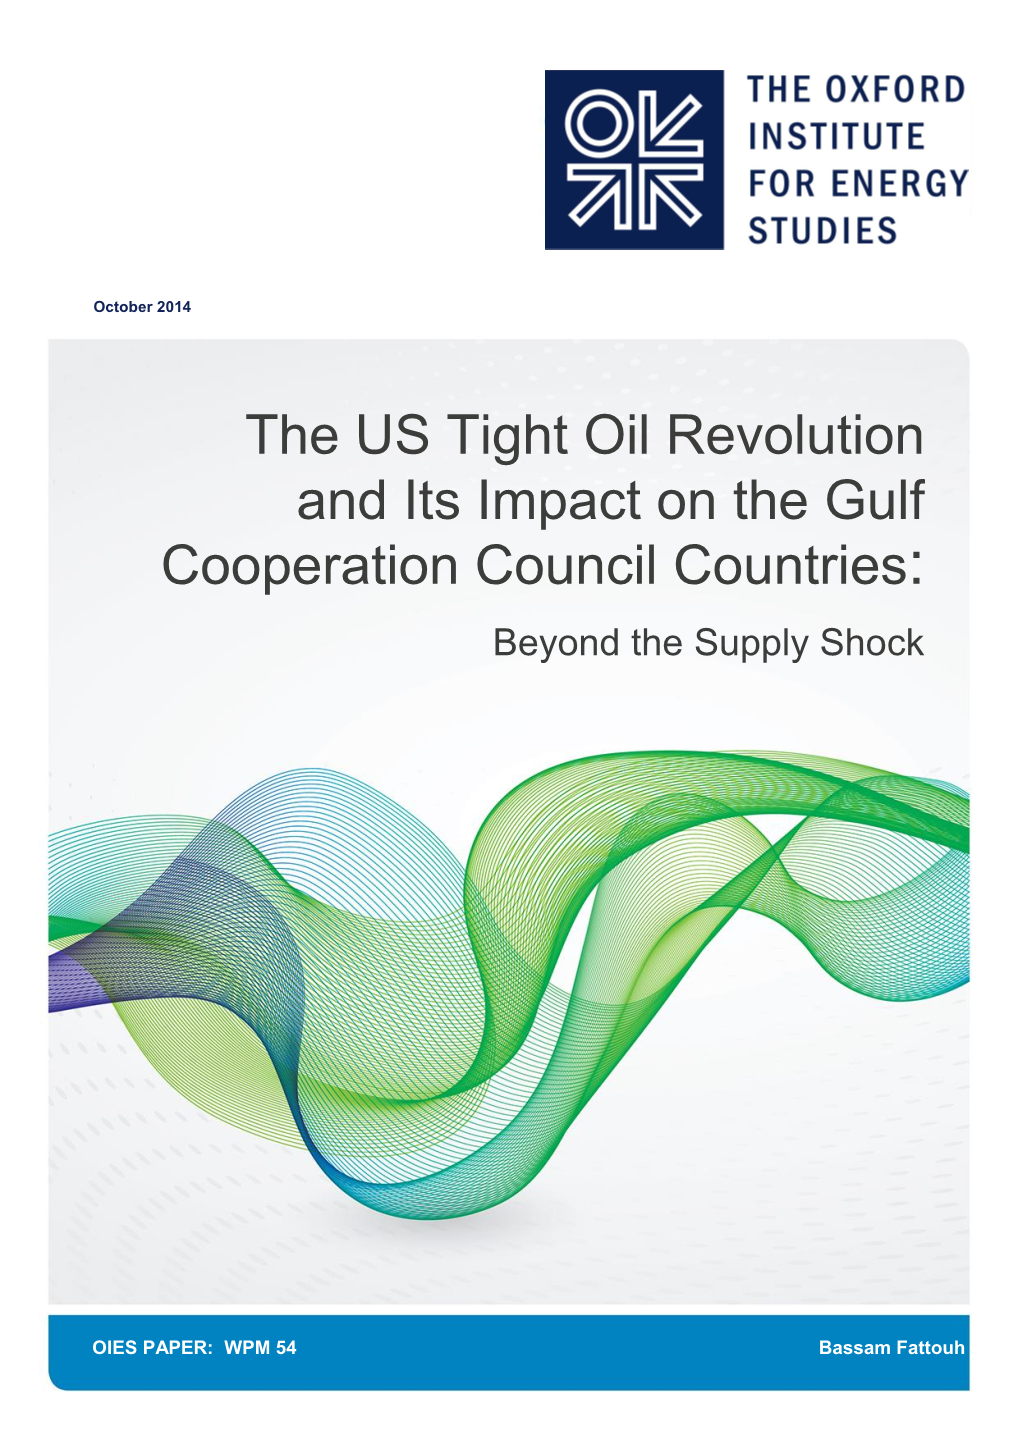 The US Tight Oil Revolution and Its Impact on the Gulf Cooperation Council Countries: Beyond the Supply Shock